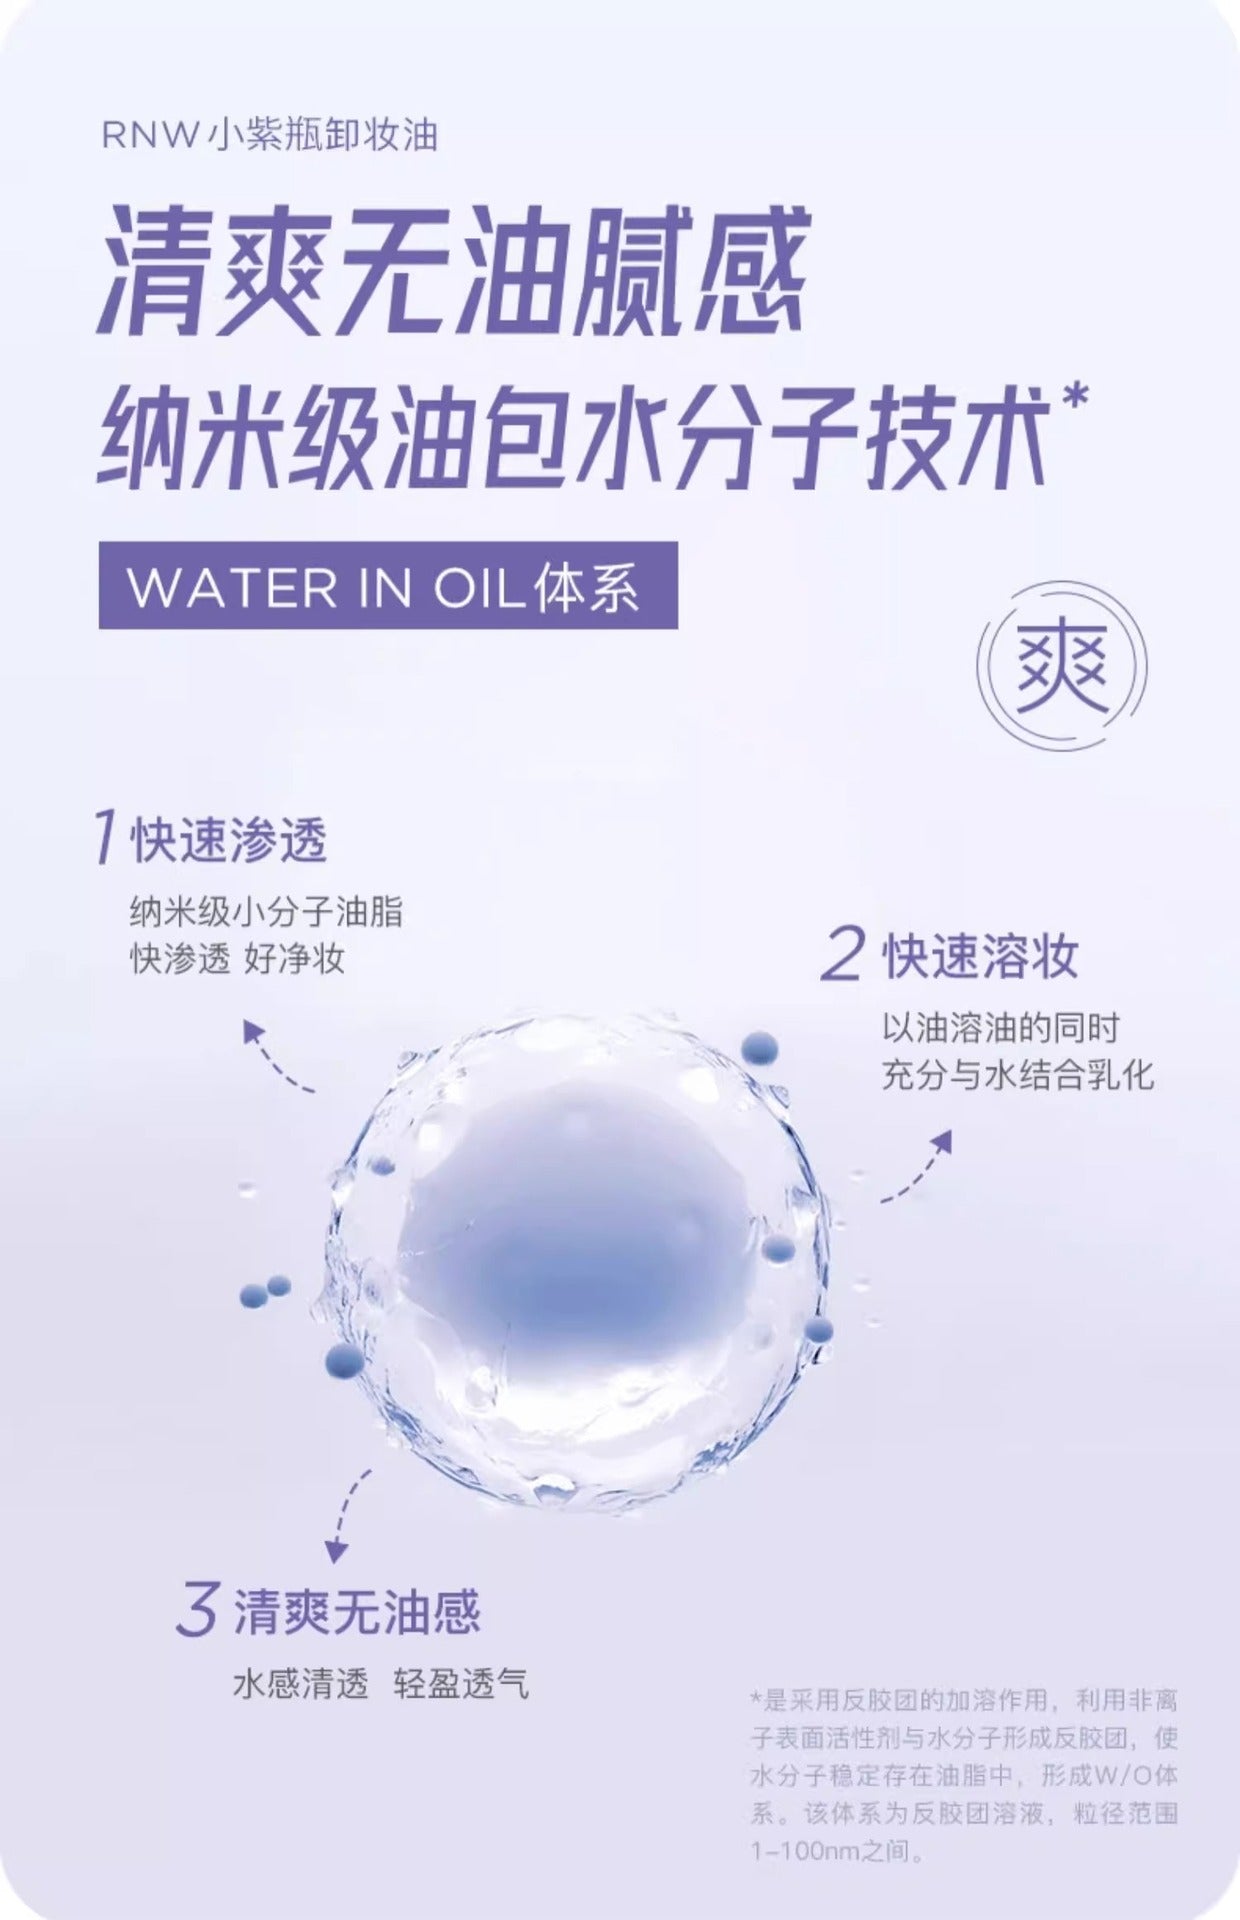 RNW Clear Purifying Portable Travel Outfit Cleansing Oil 30ML 如薇清透净化便携旅行装卸妆油